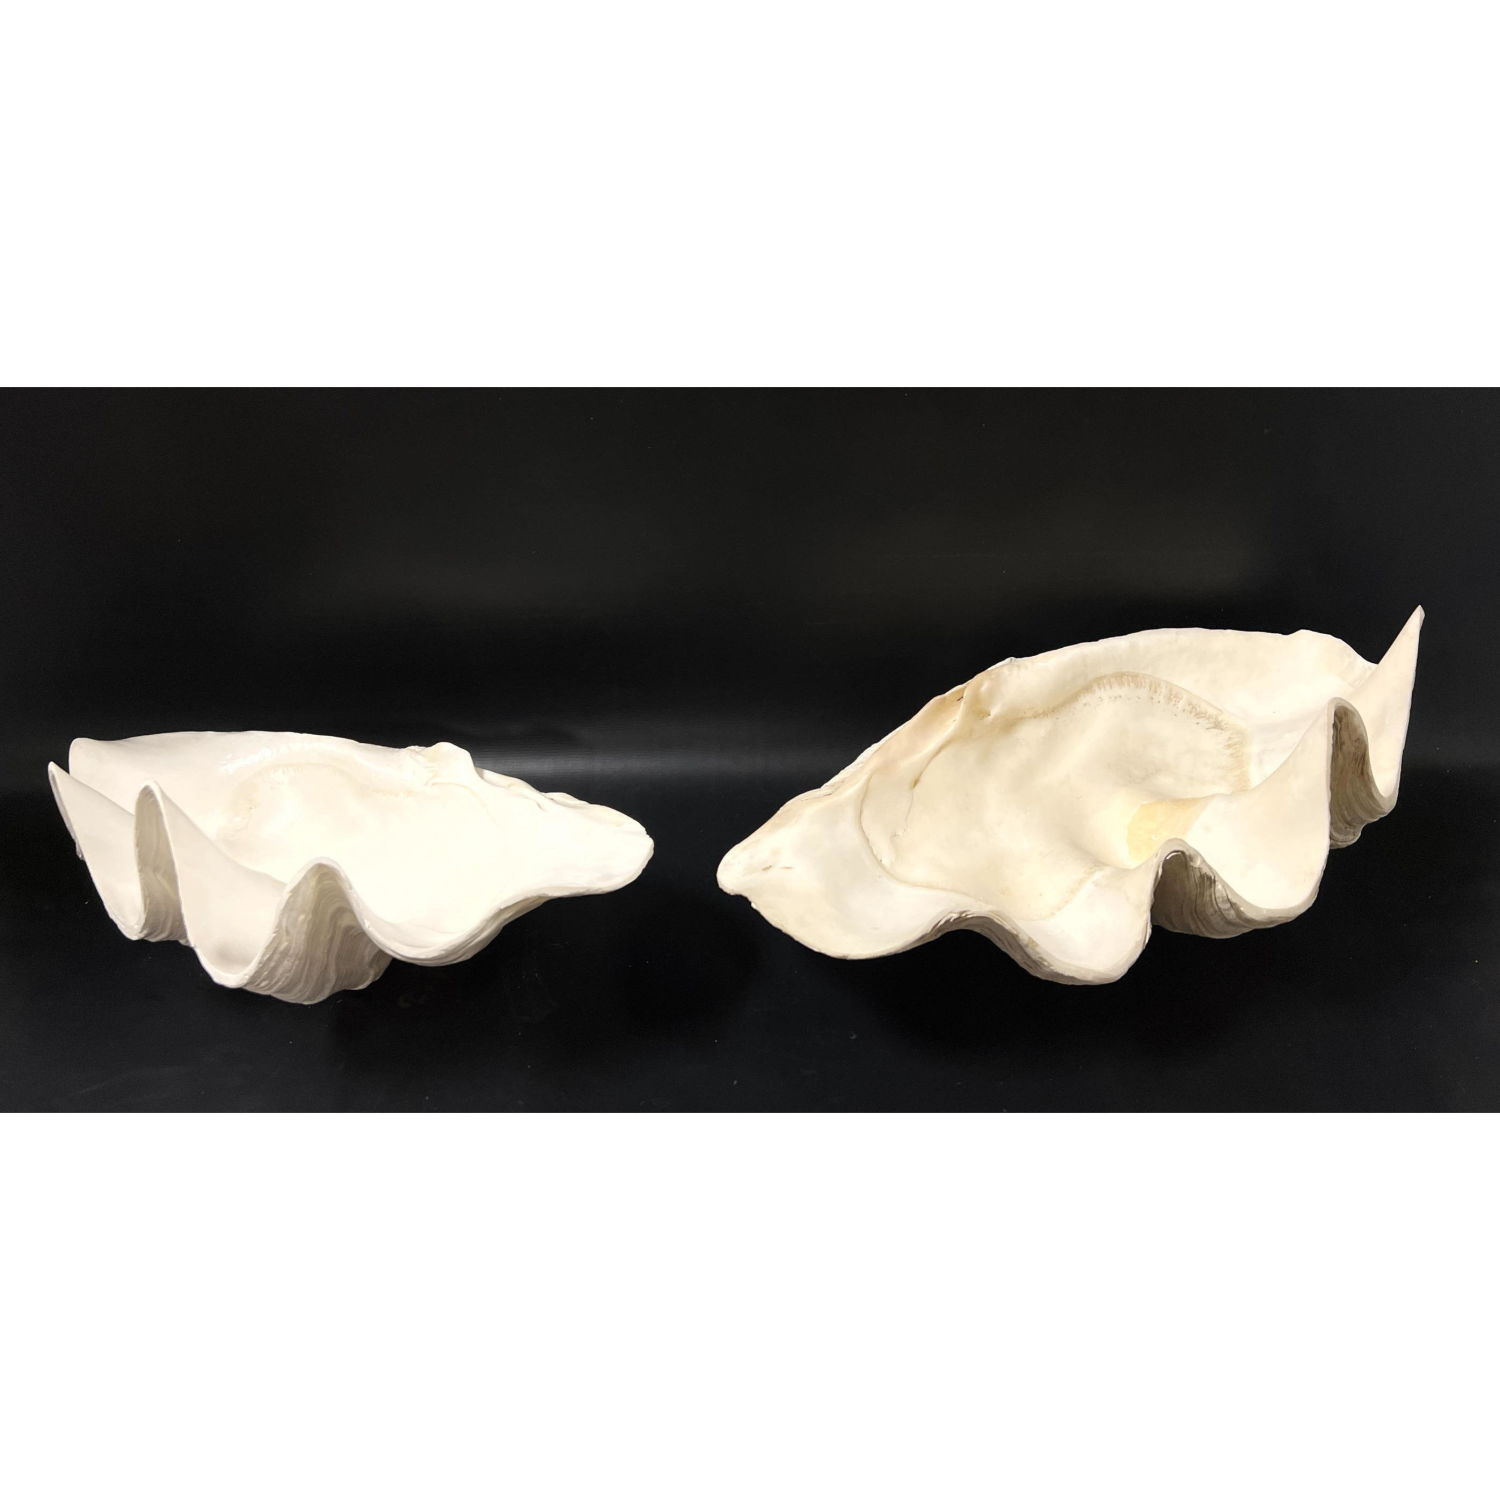 2pc Natural Giant Clam Shells  2ff7c9